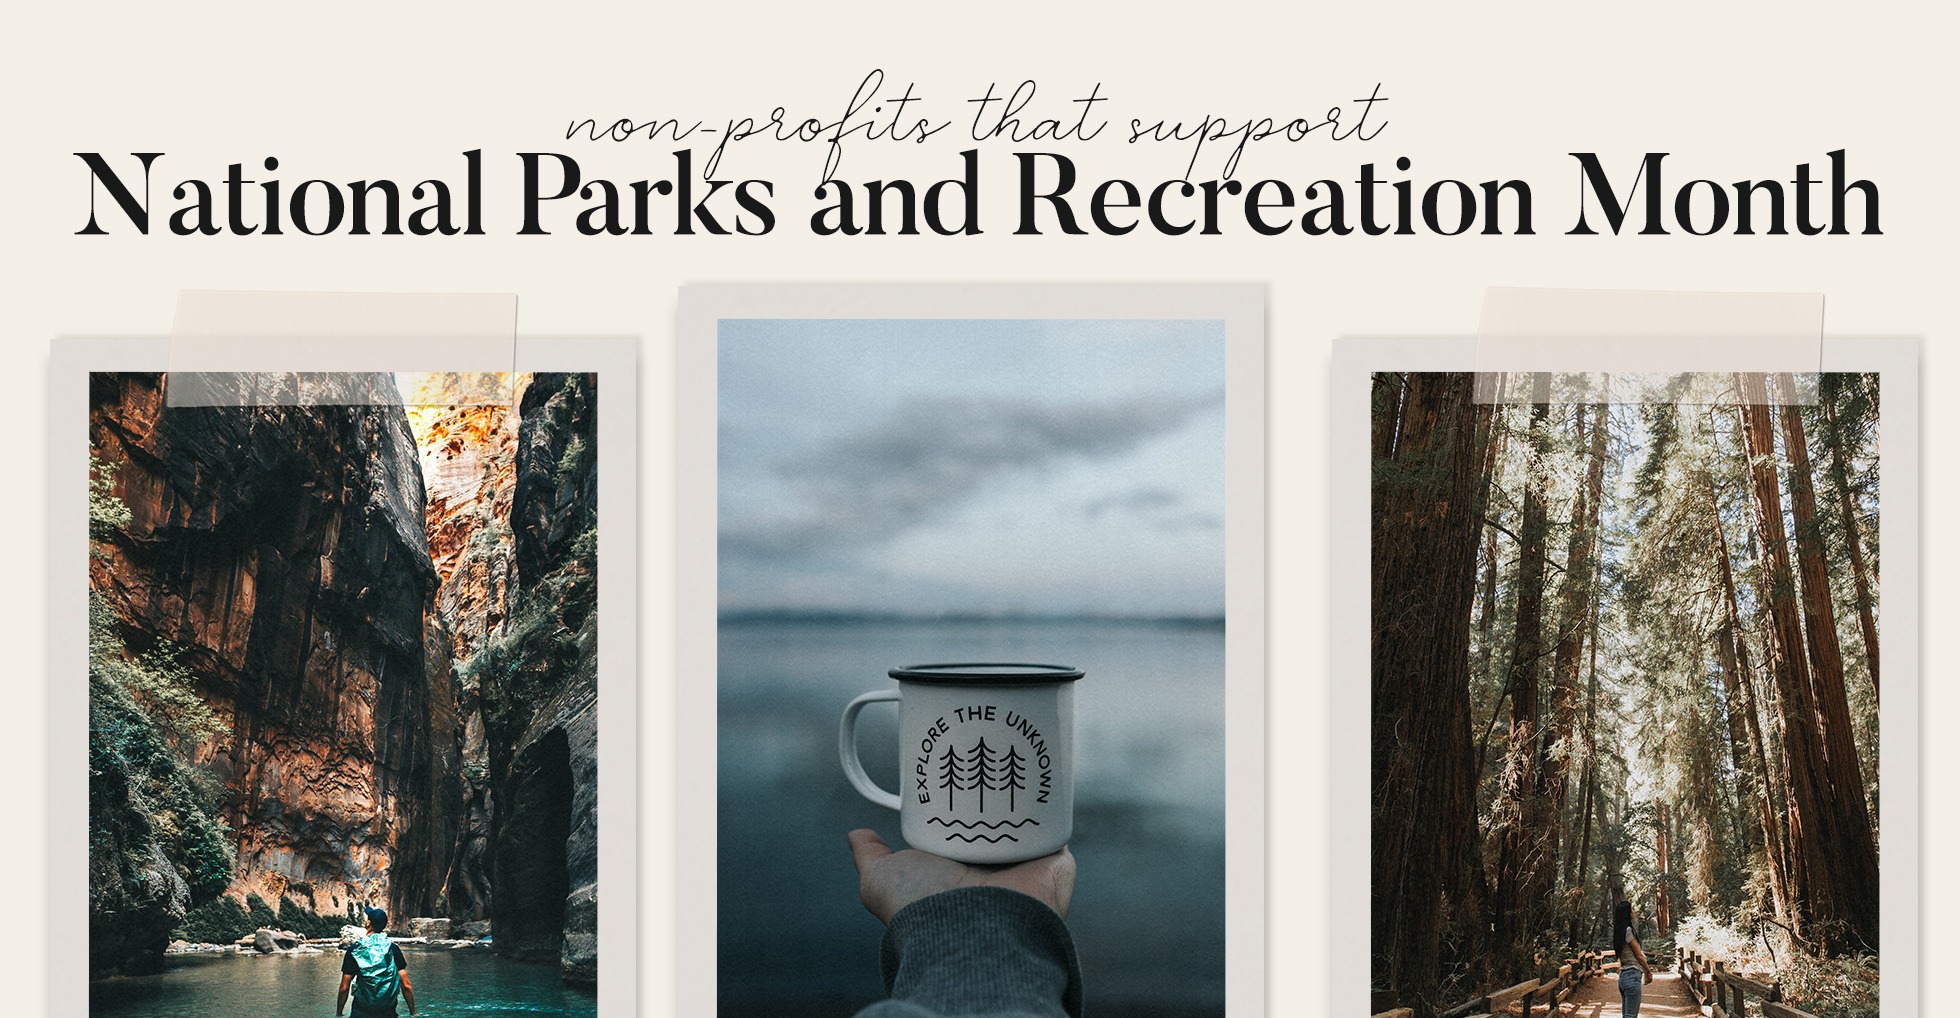 Nonprofits to Support National Parks and Recreation Month